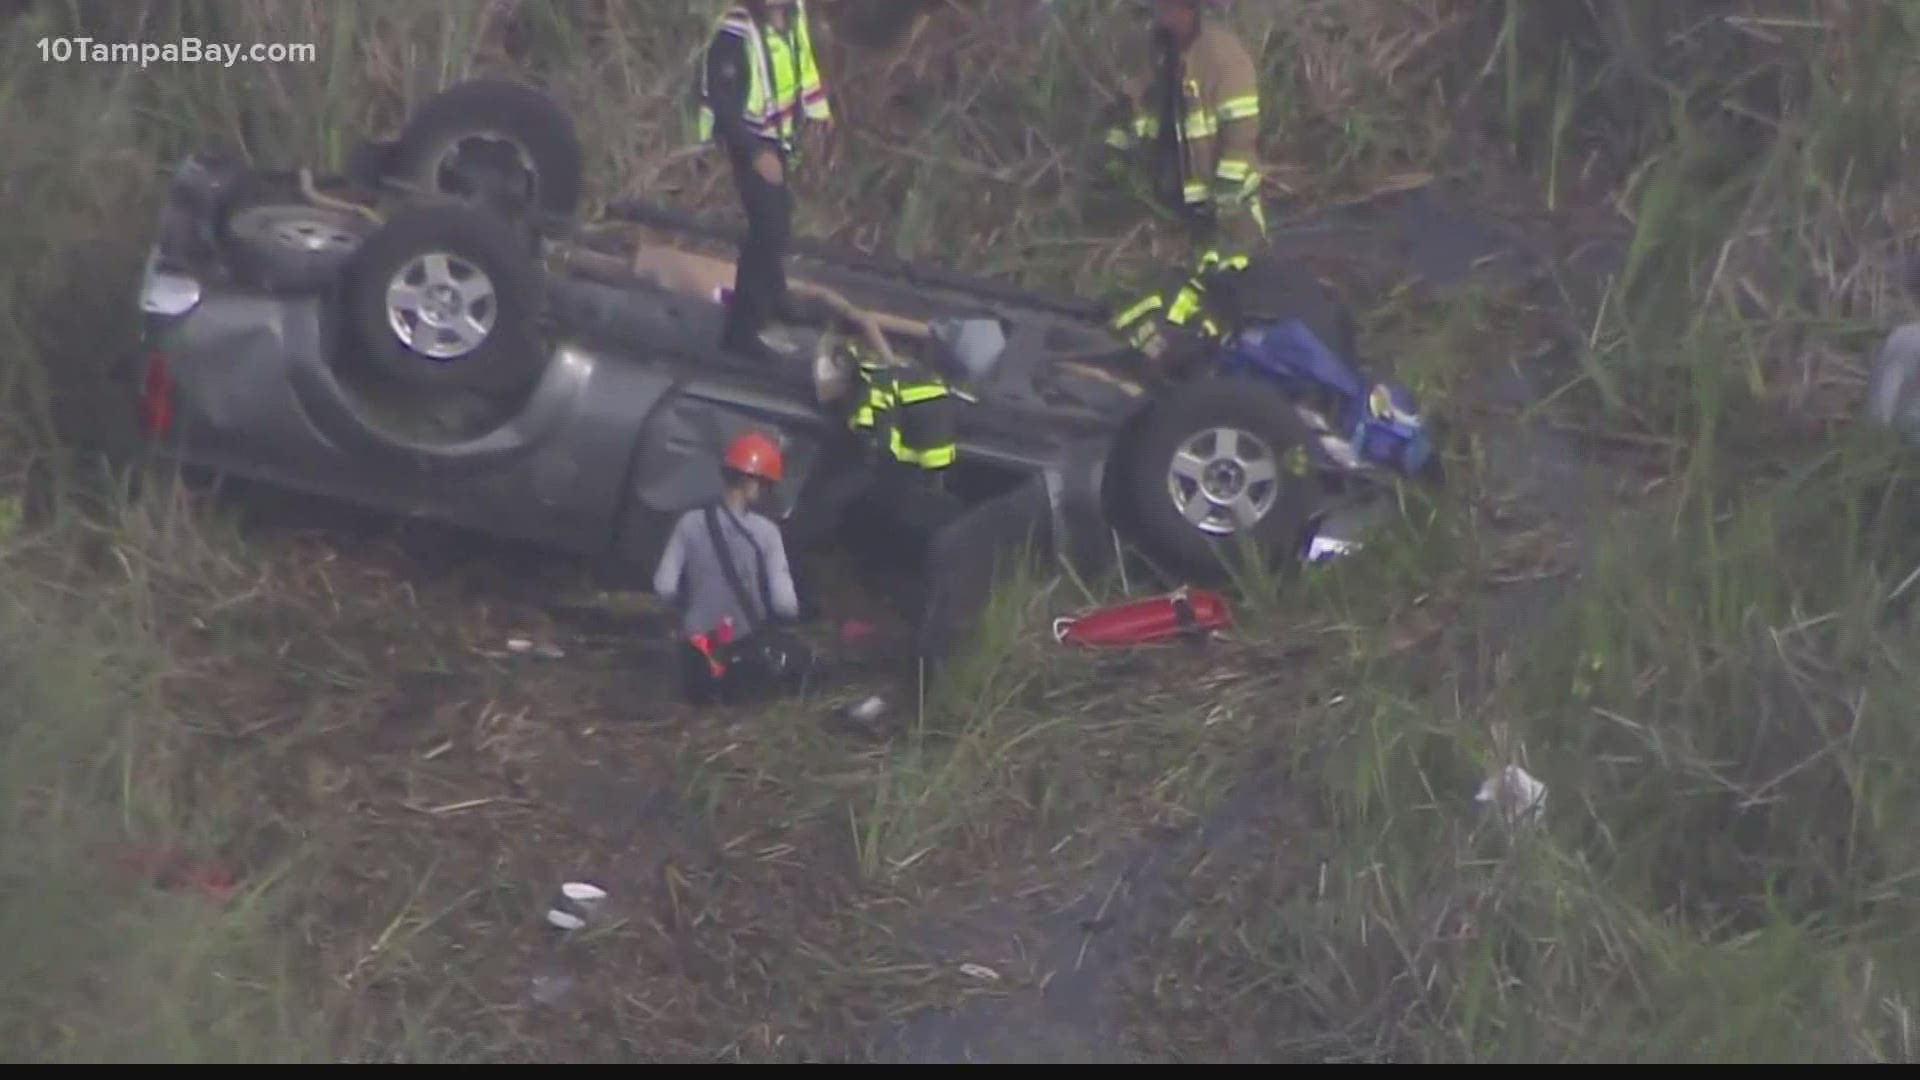 Authorities said the crash happened in Alligator Alley on I-75 near mile marker 27.